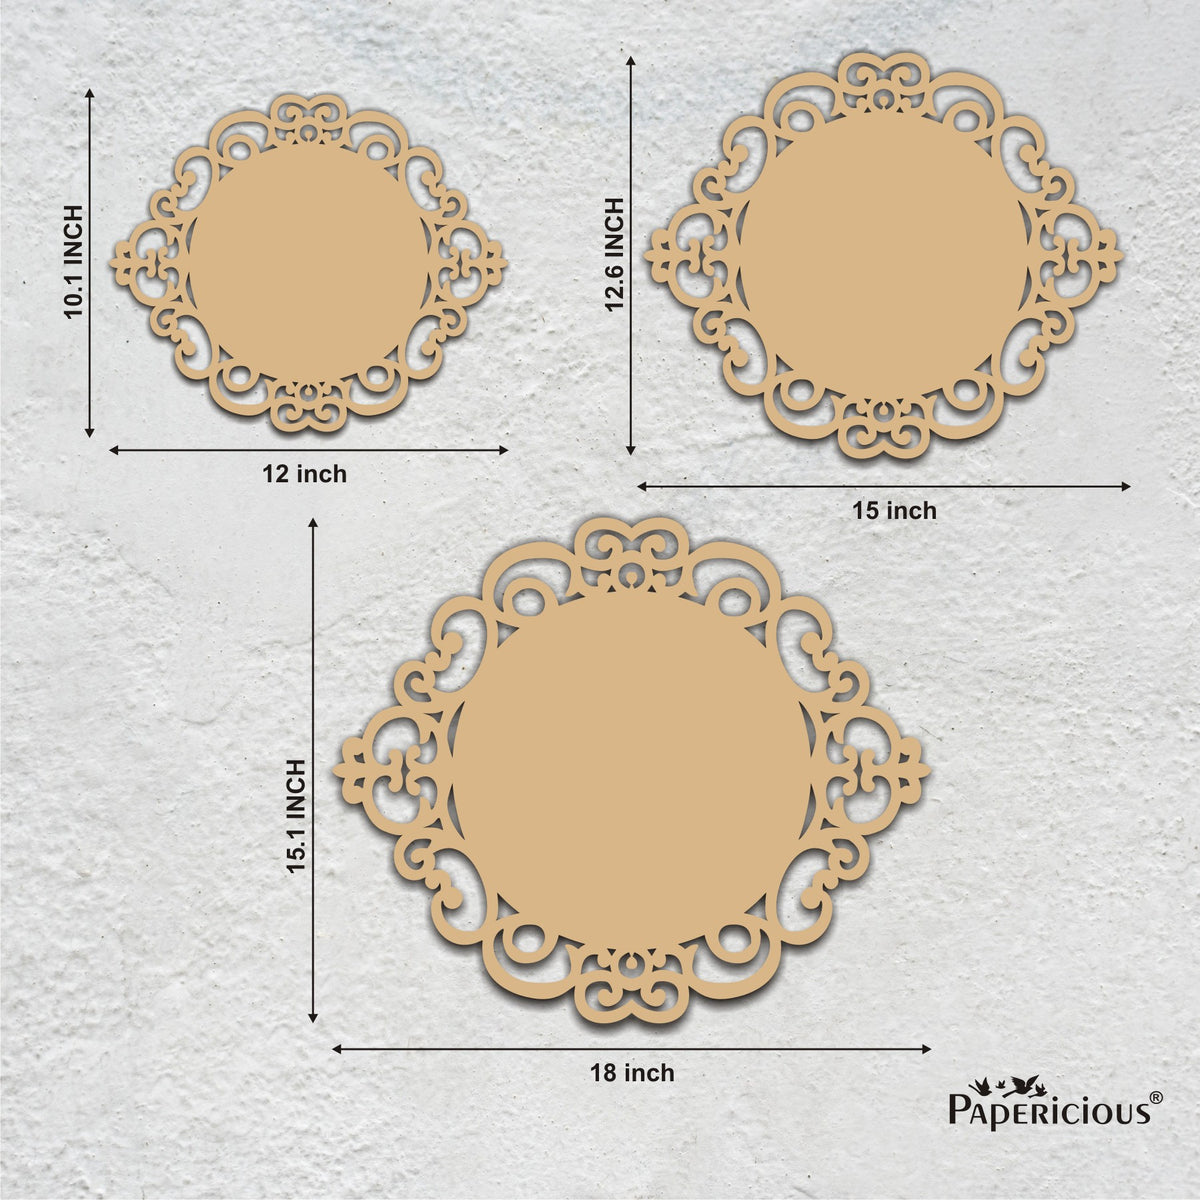 PAPERICIOUS 4.2mm thick MDF Name Plate Circular